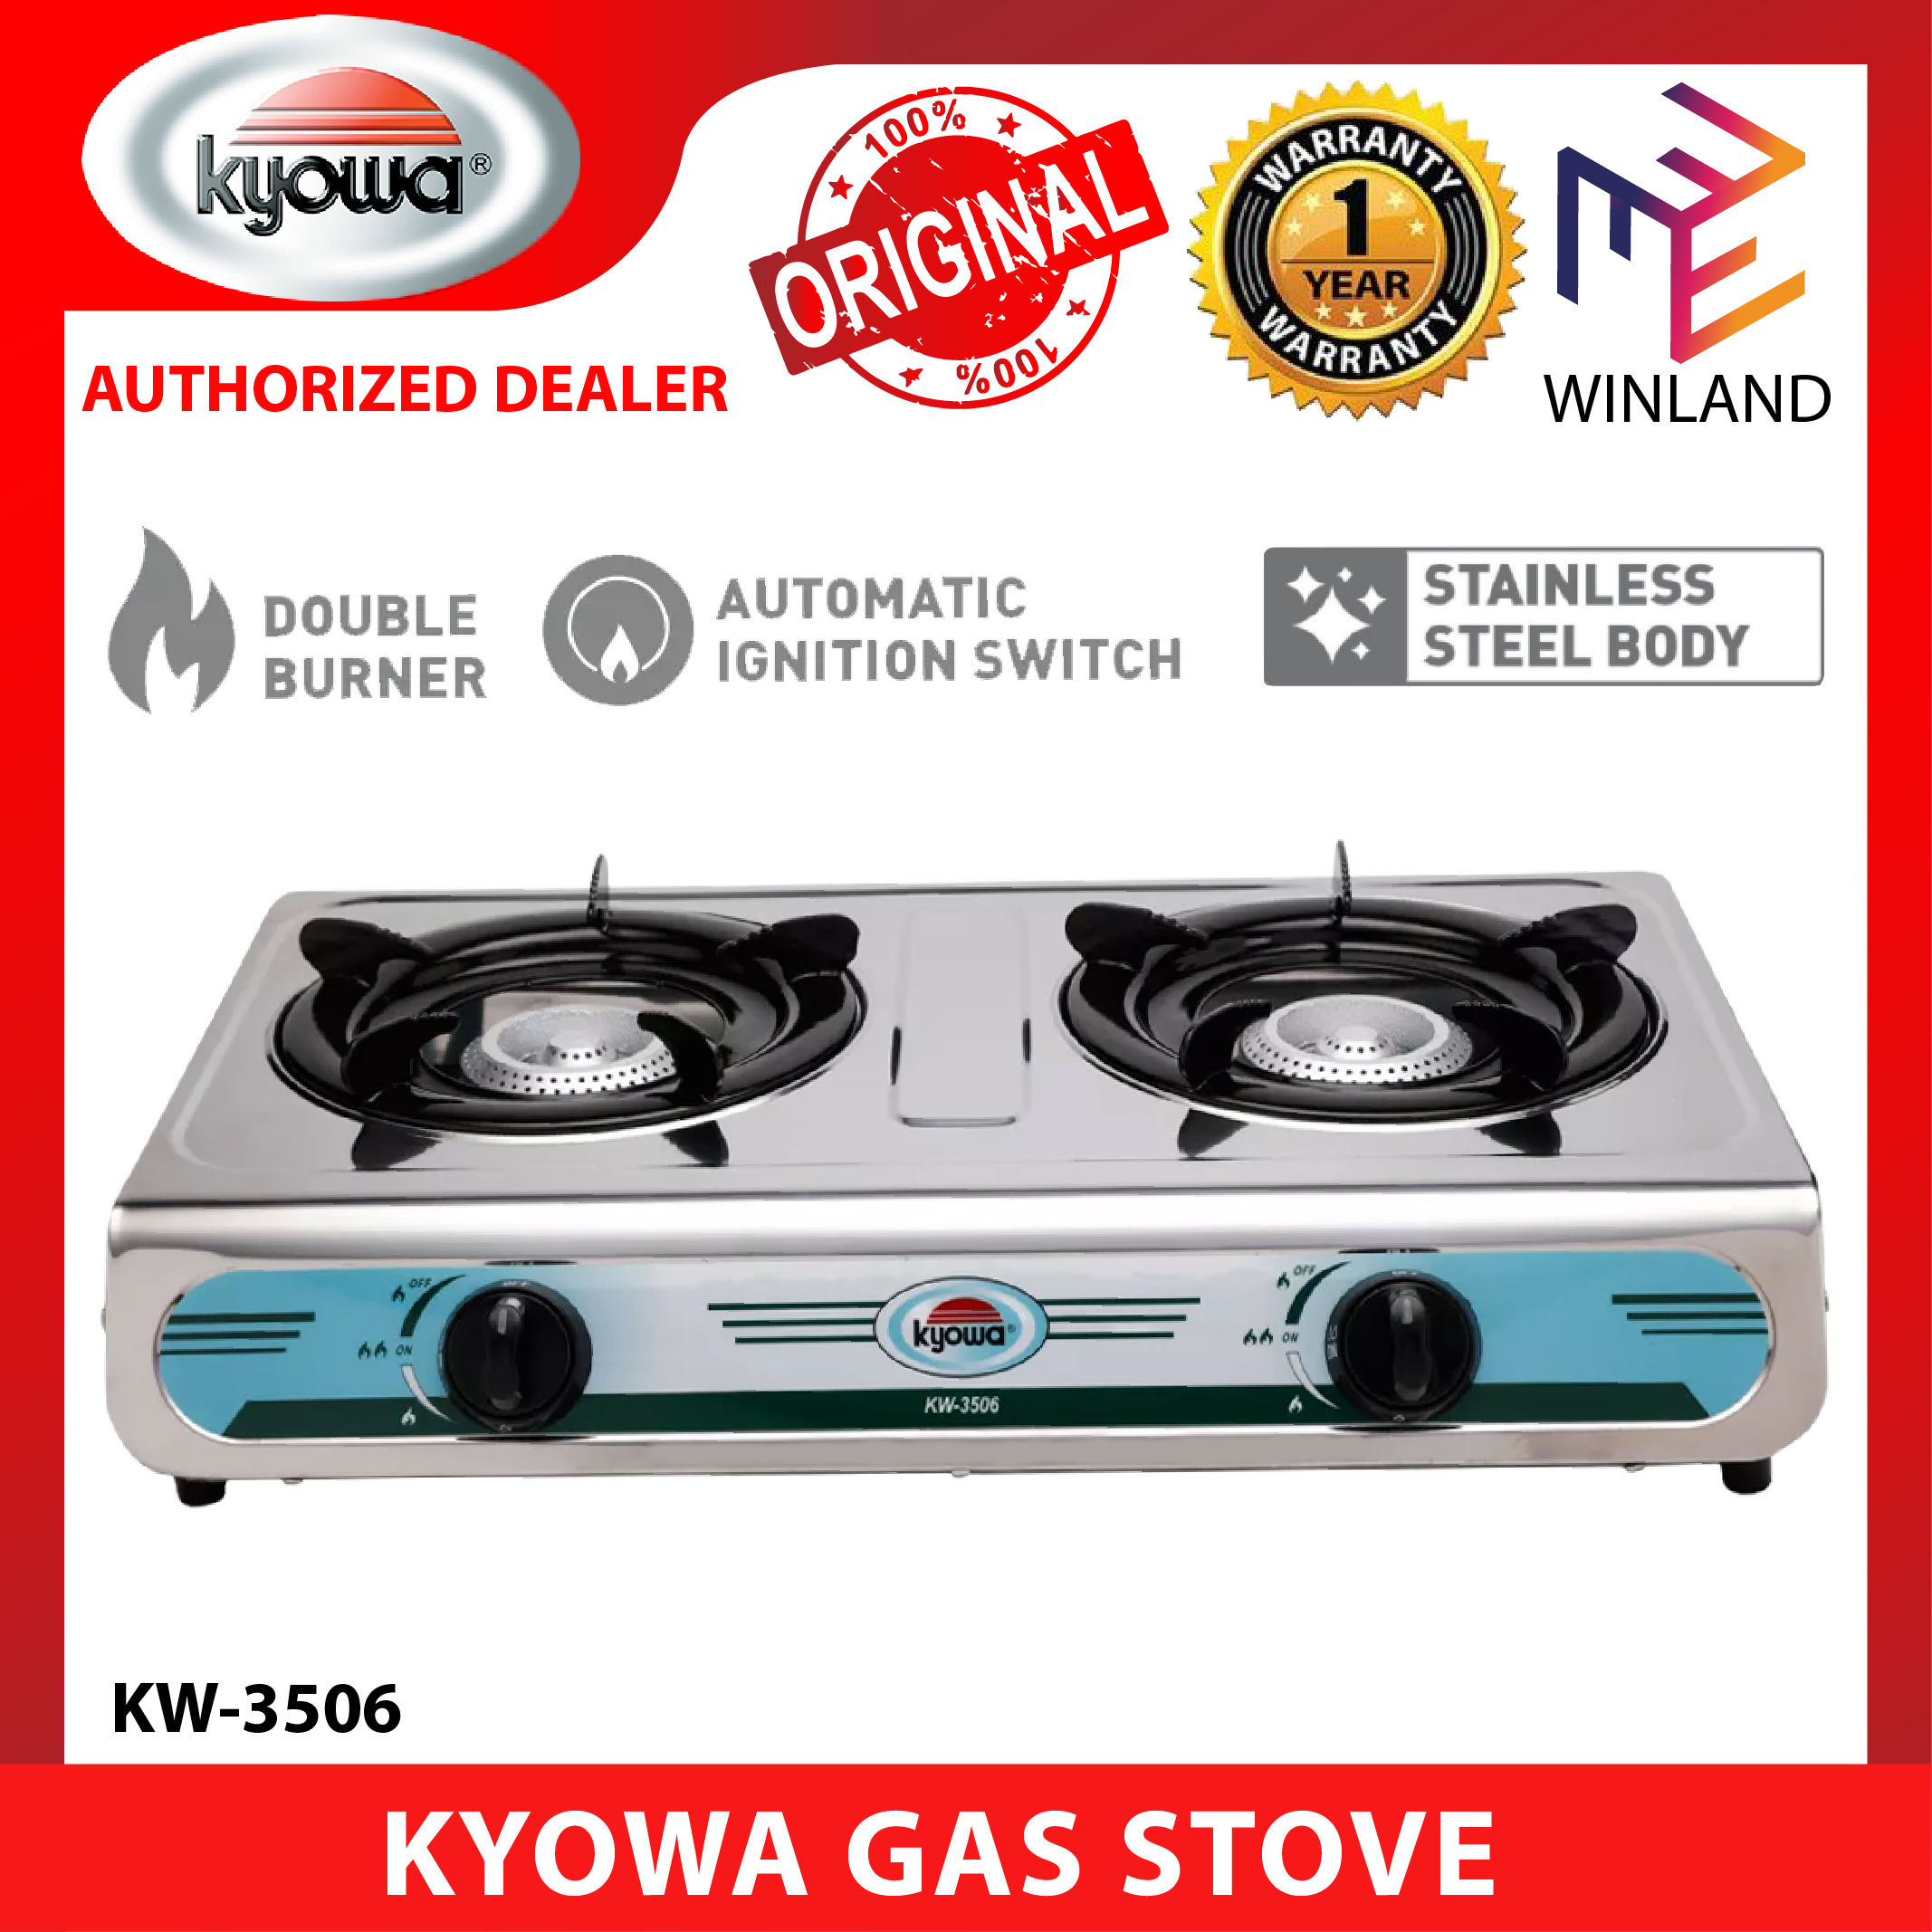 Winland Stainless Steel Double Burner Gas Stove with Cast Iron Burners